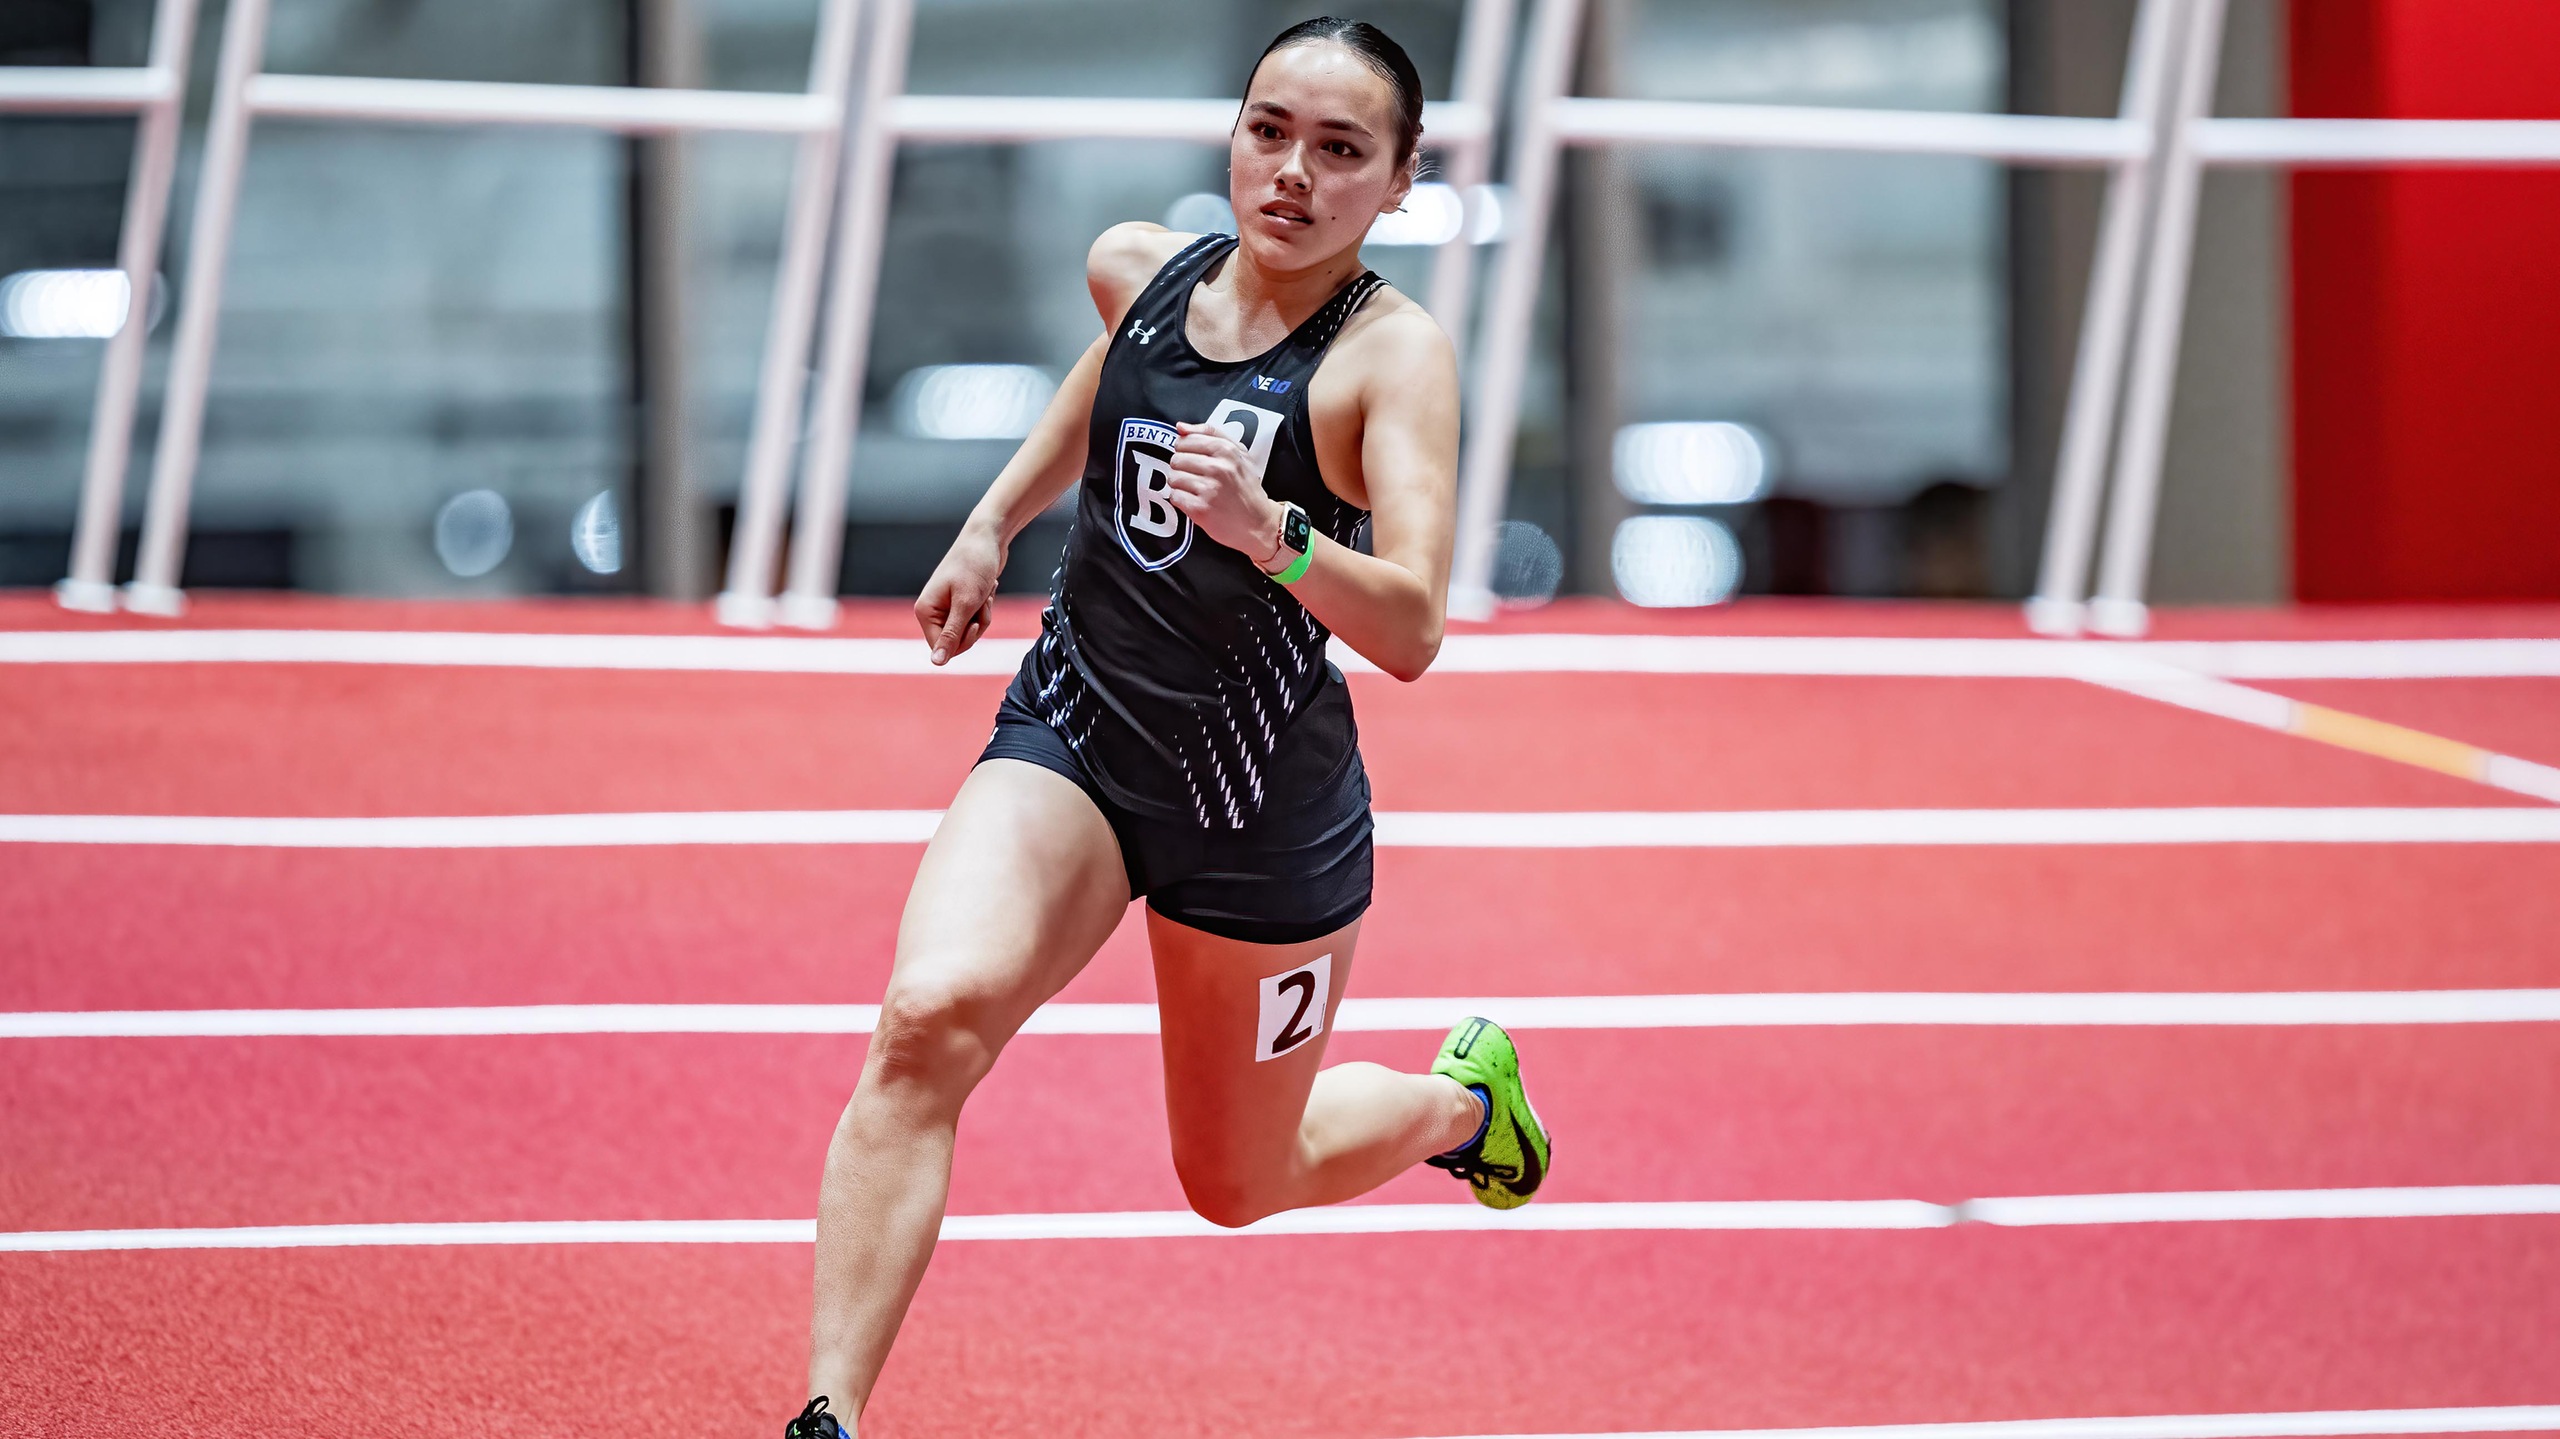 Track & Field Returns With Greater Boston Track Club Meet on Sunday